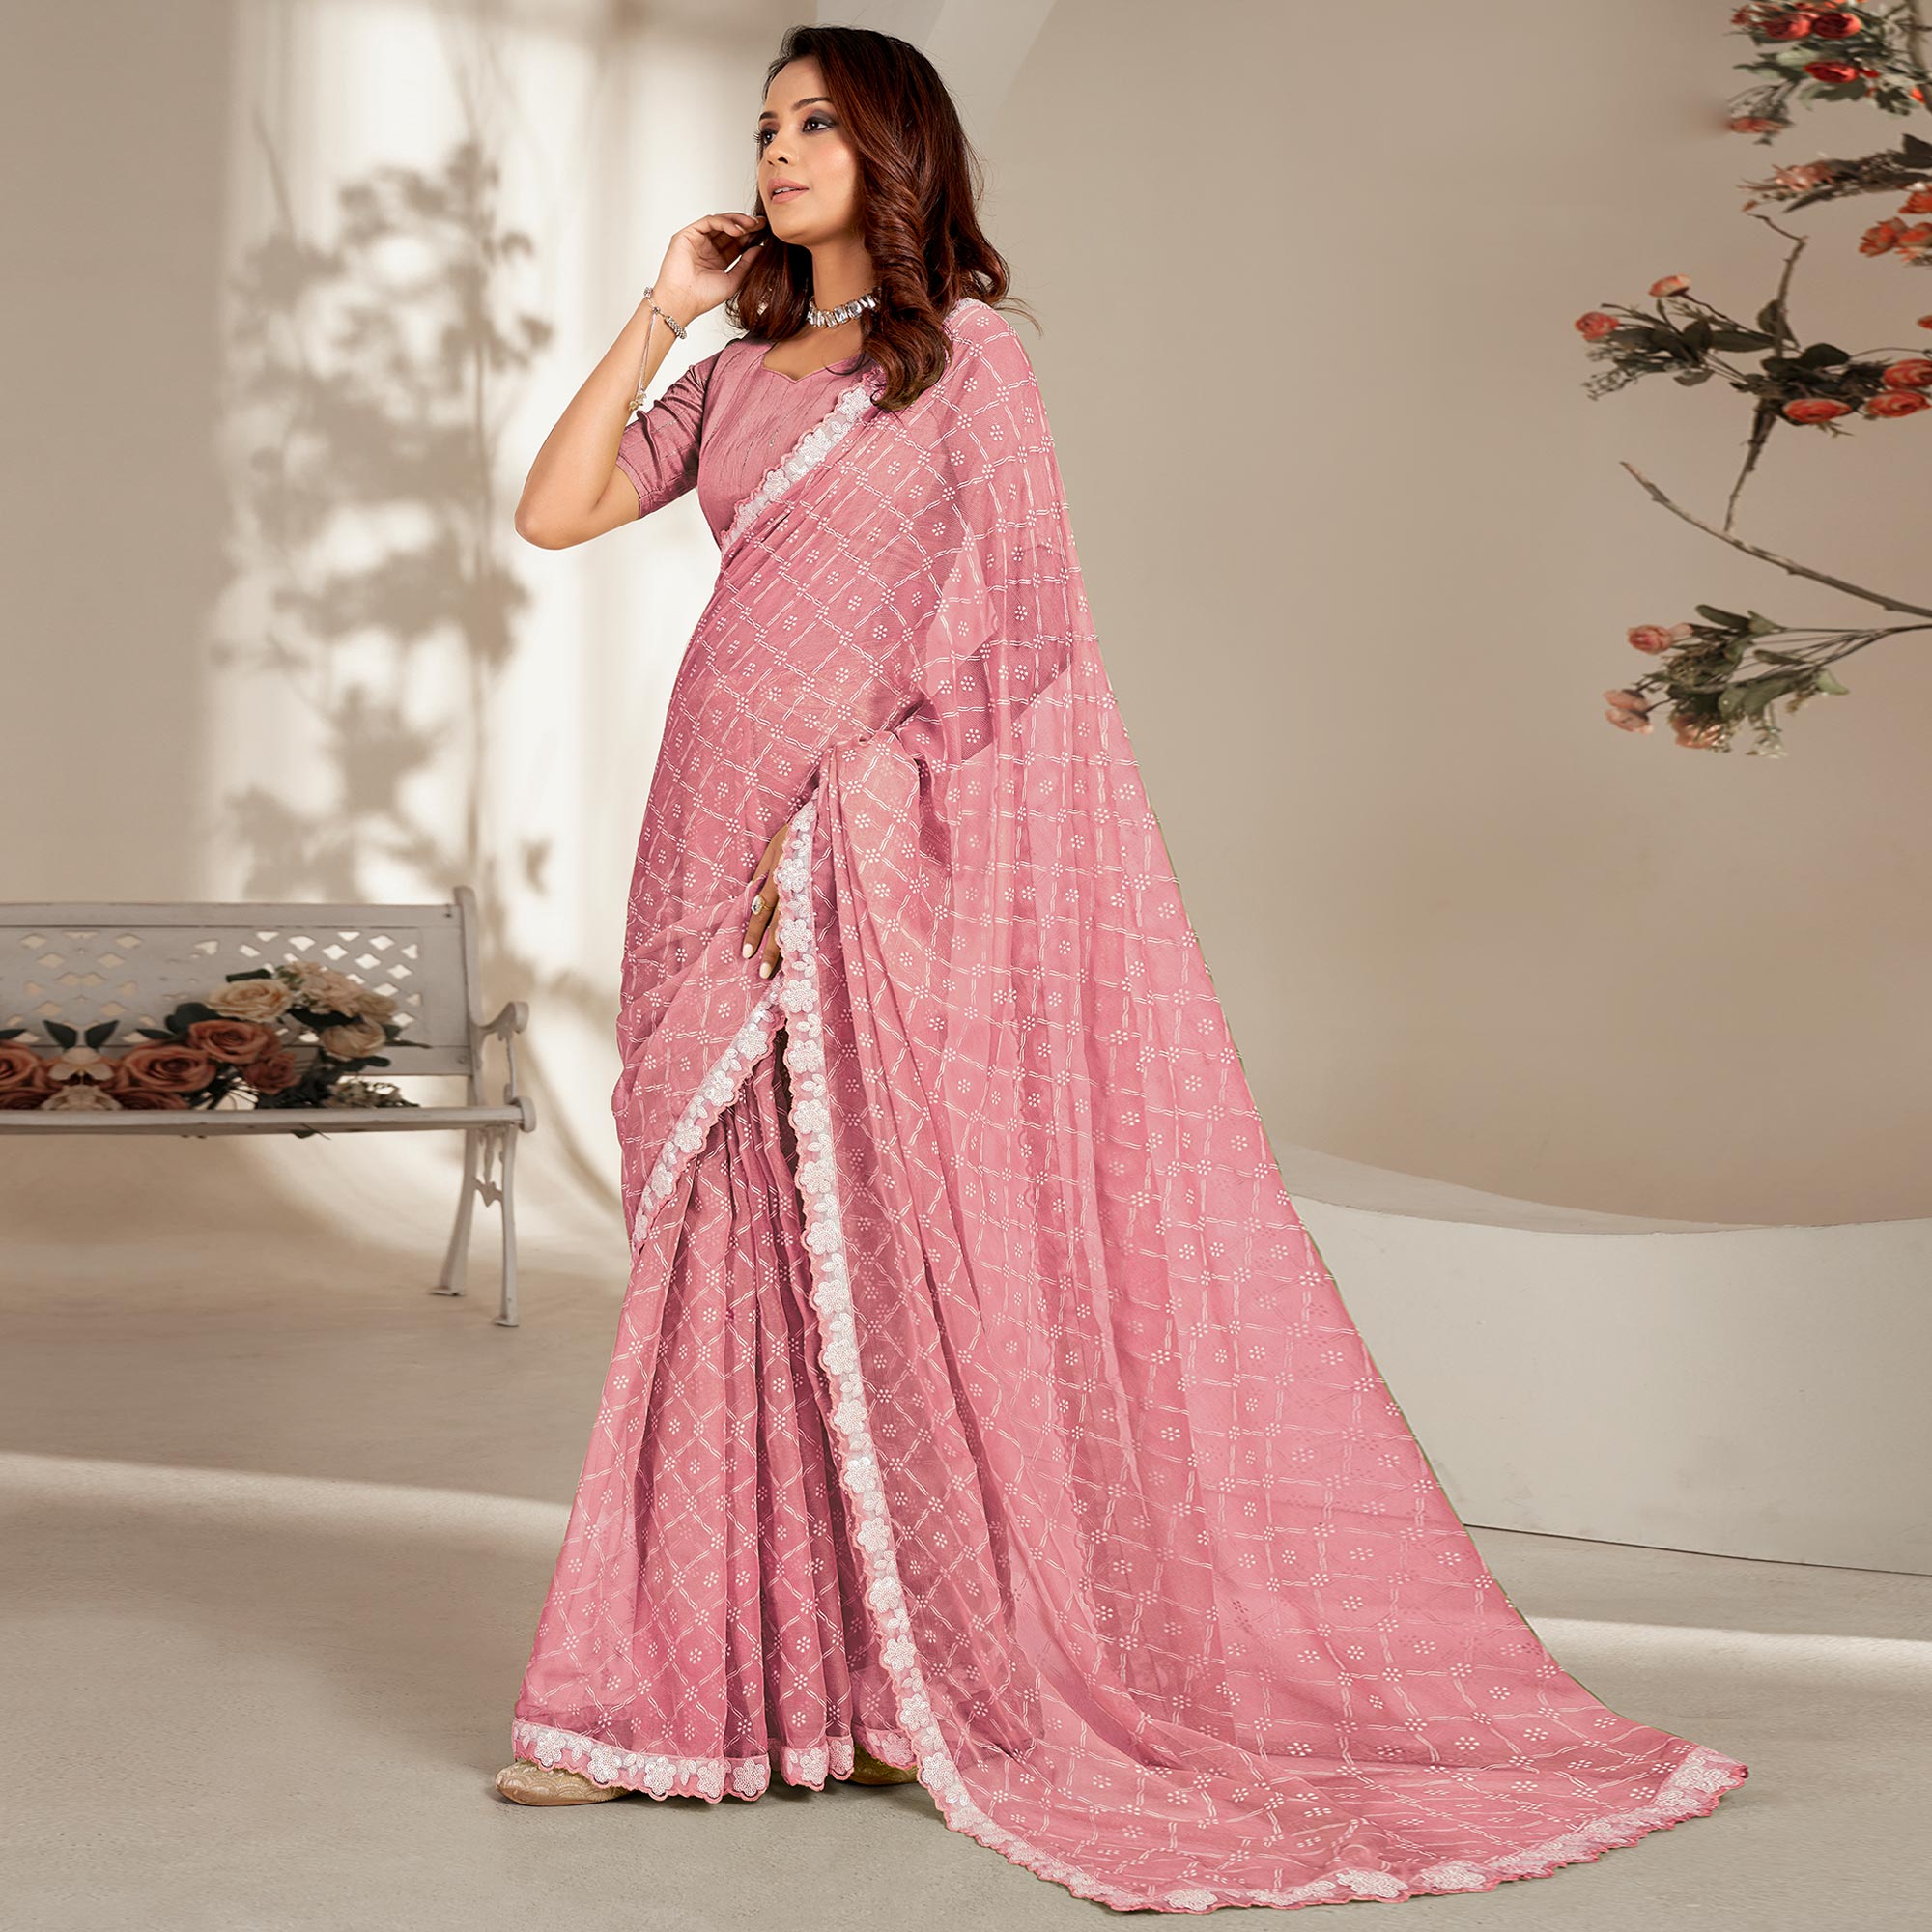 Dusty Pink Floral Printed Chiffon Saree With Embroidered Border